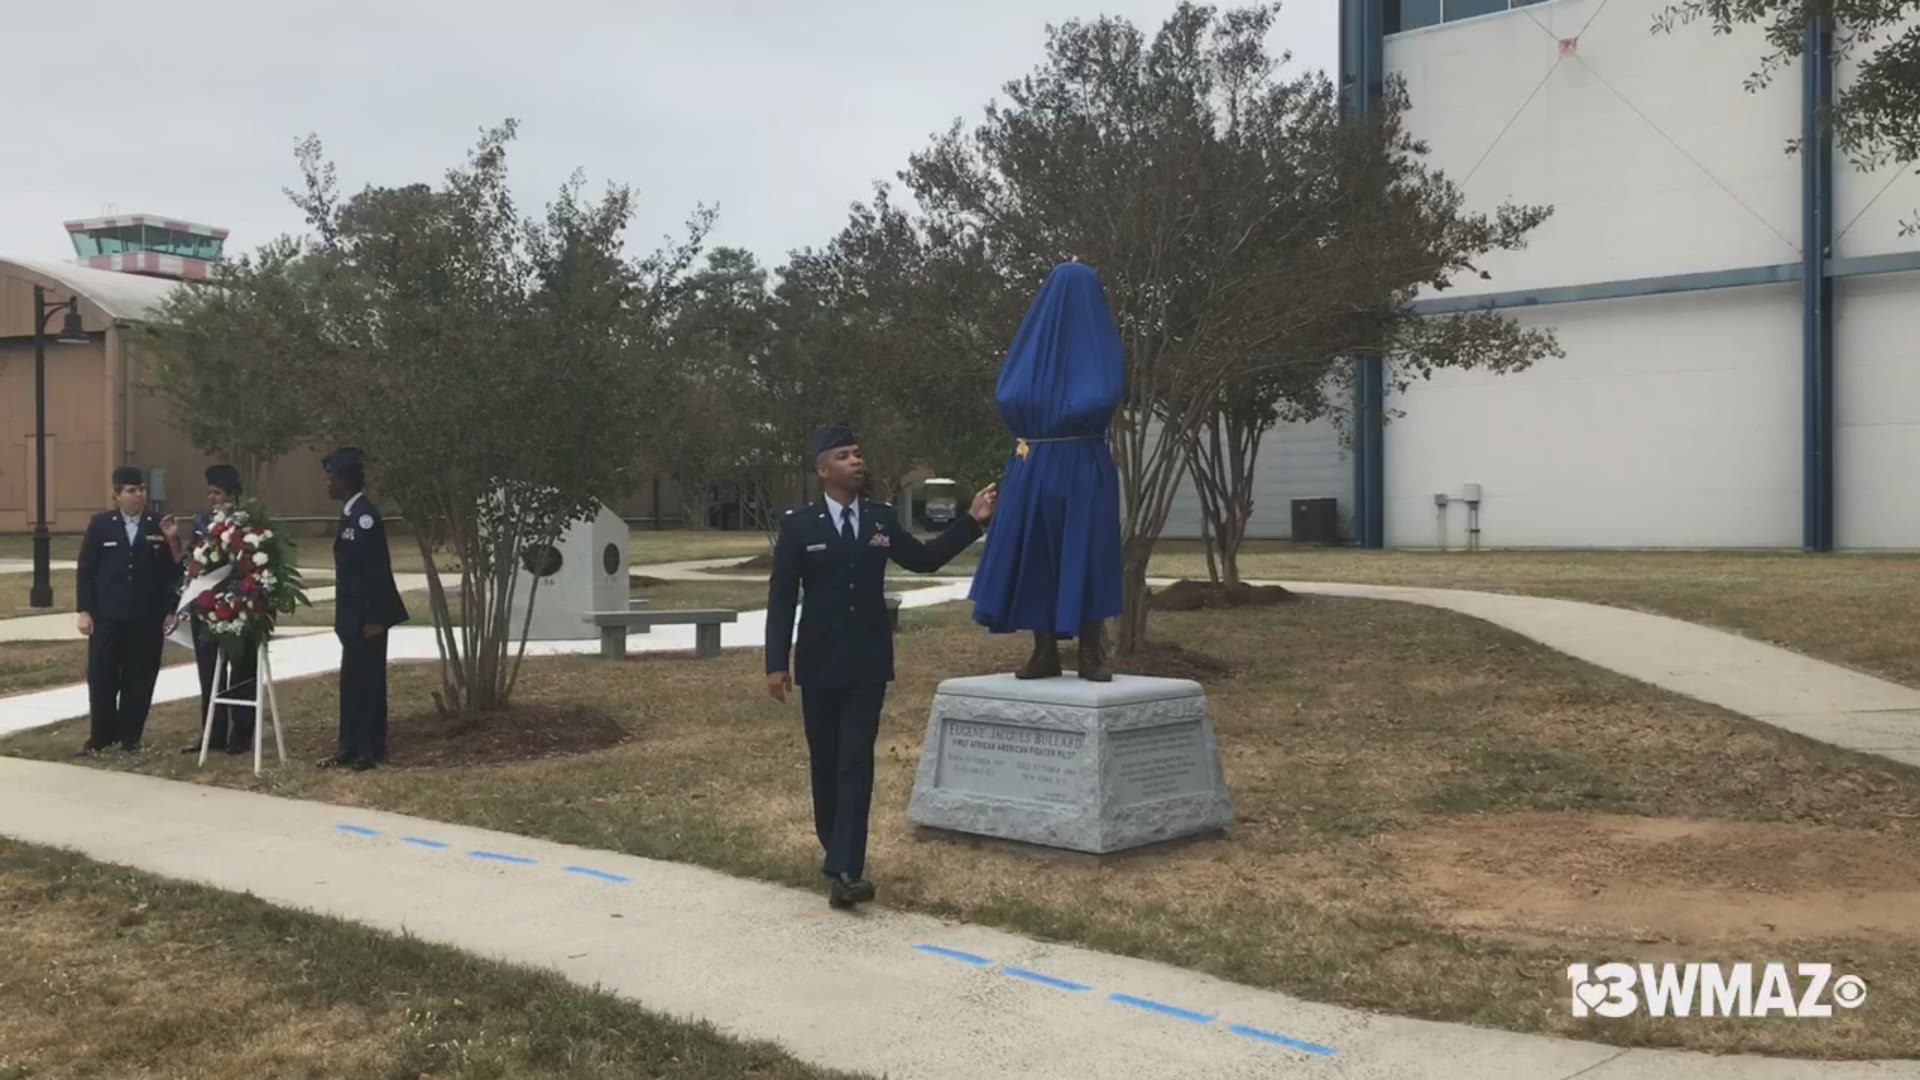 The Museum of Aviation helped honor Eugene Bullard, the world's first black fighter pilot from World War I. The ceremony was held Wednesday.